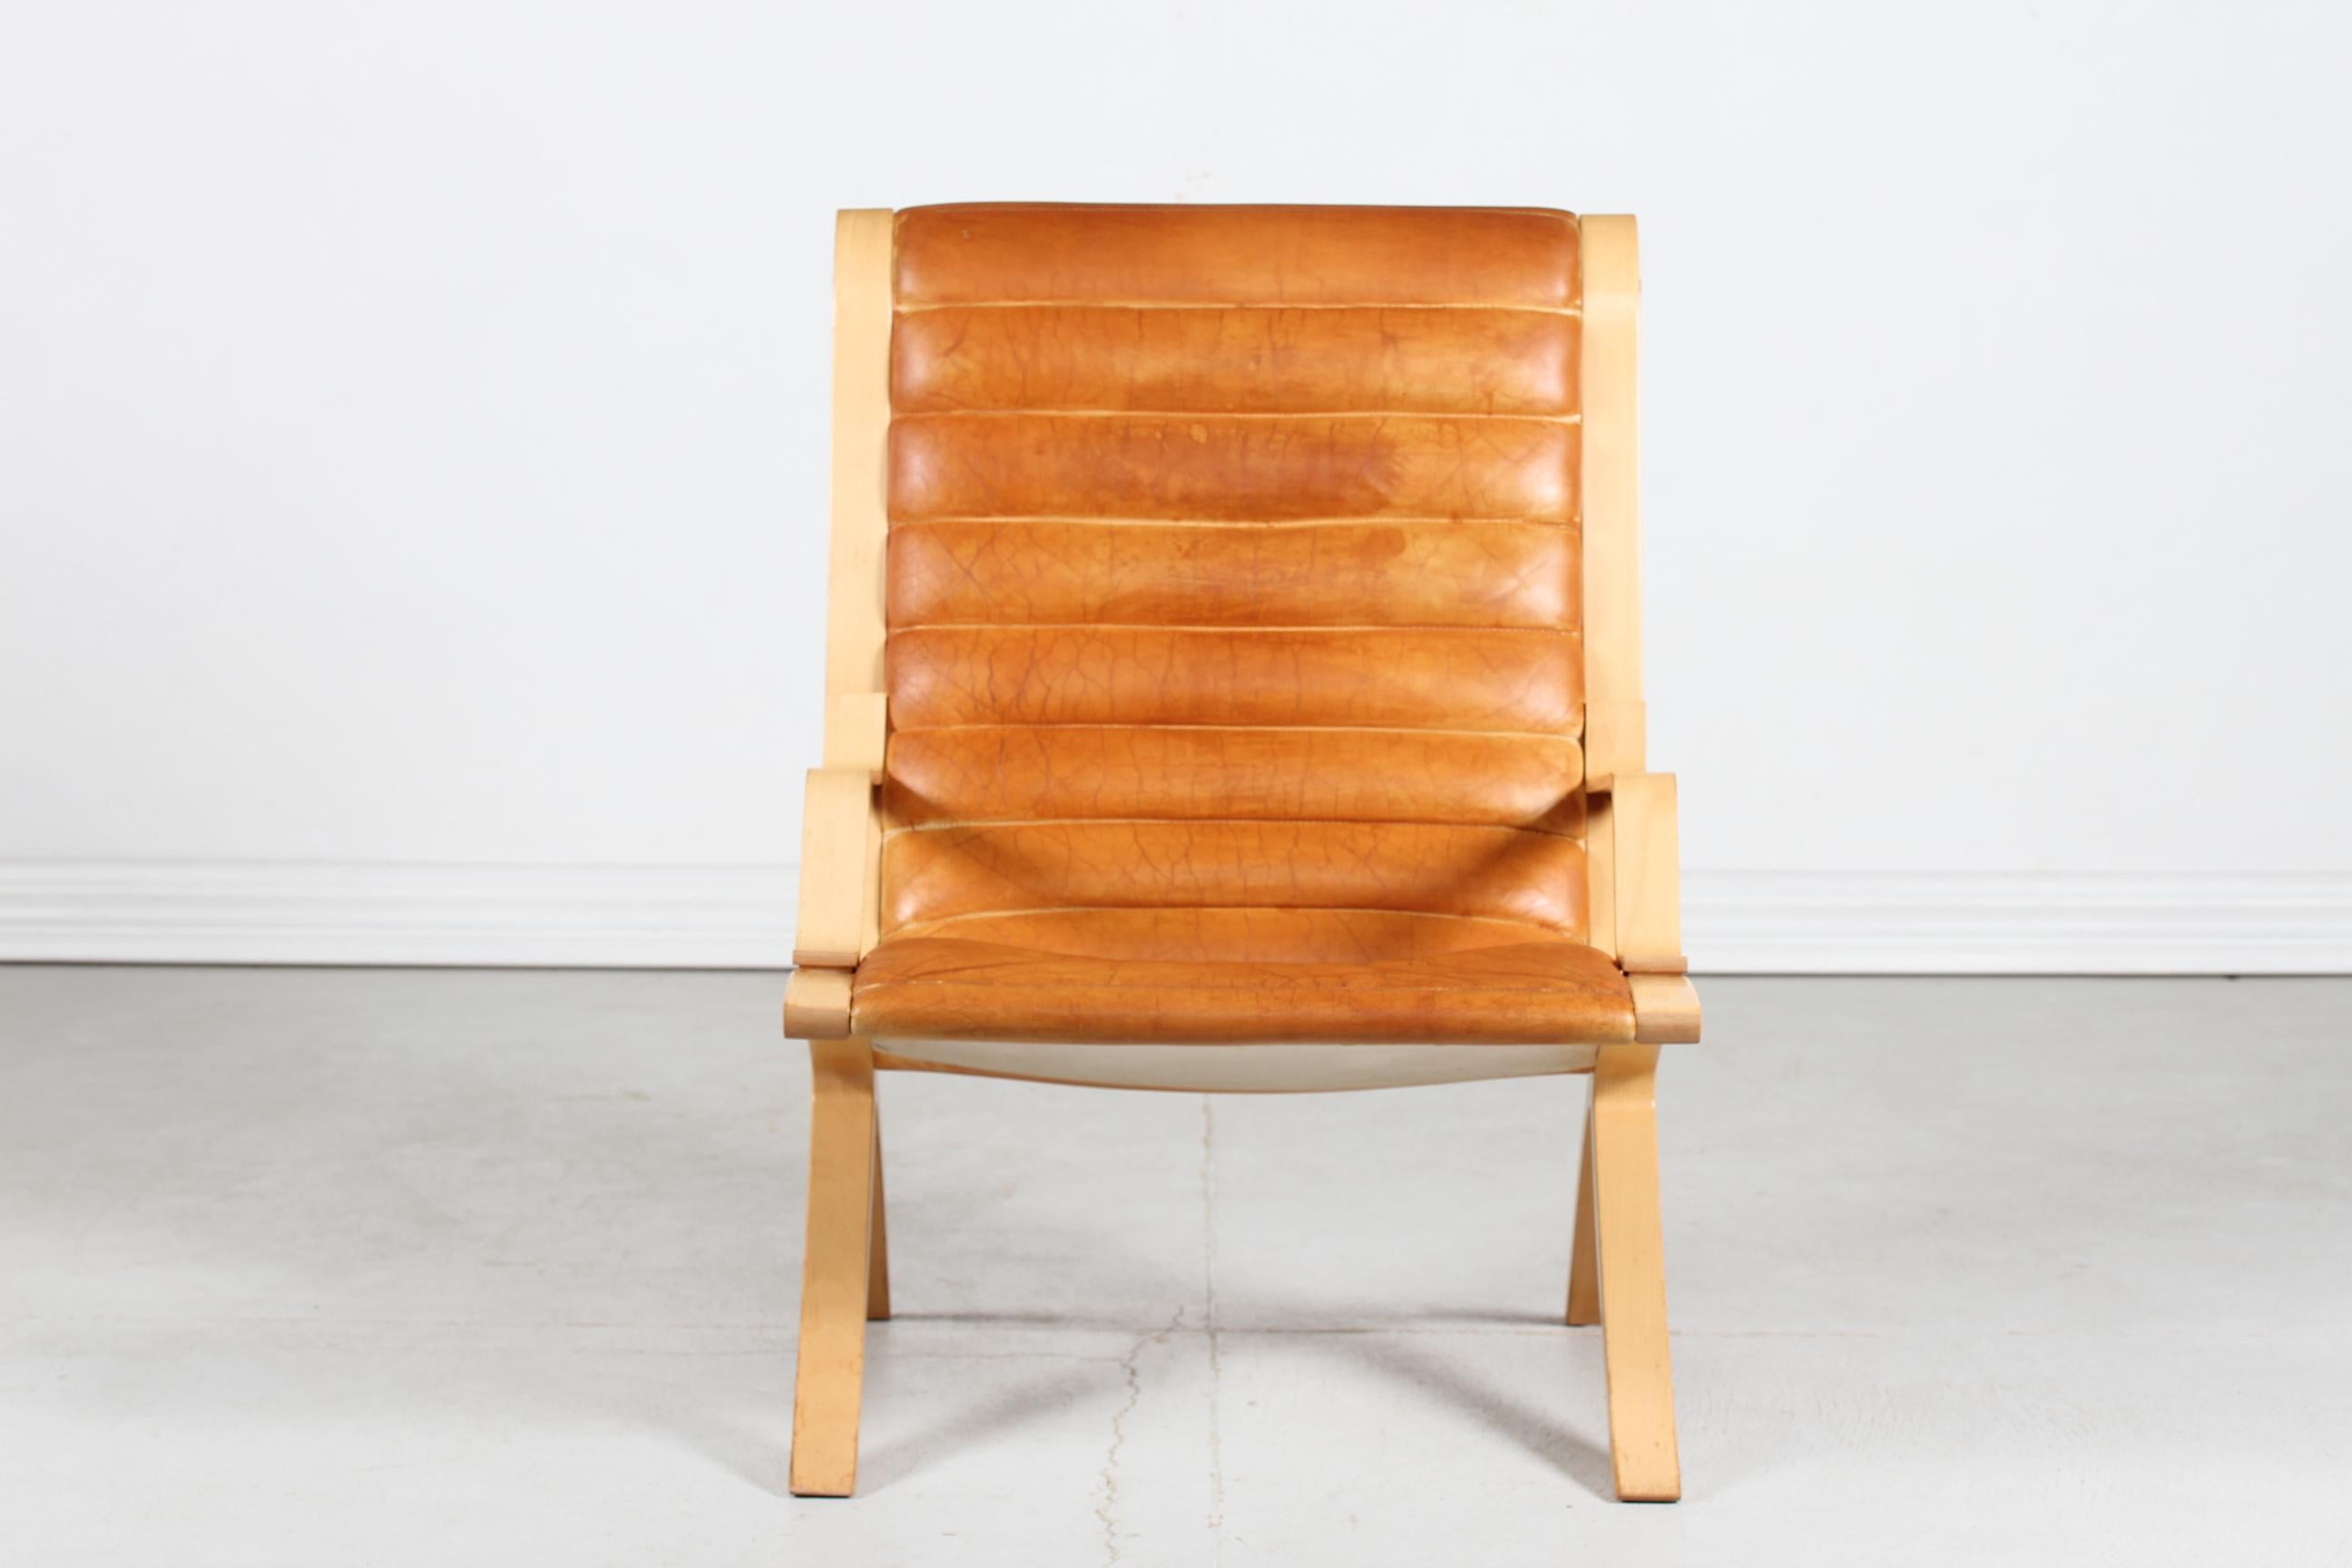 Vintage AX-chair by the Danish architects Peter Hvidt & Orla Mølgaard.

The chair is made of steam bend beech with lacquer and upholstered with cognac colored natural leather with great patina.

Manufactured by Fritz Hansen A/S in 1978

The